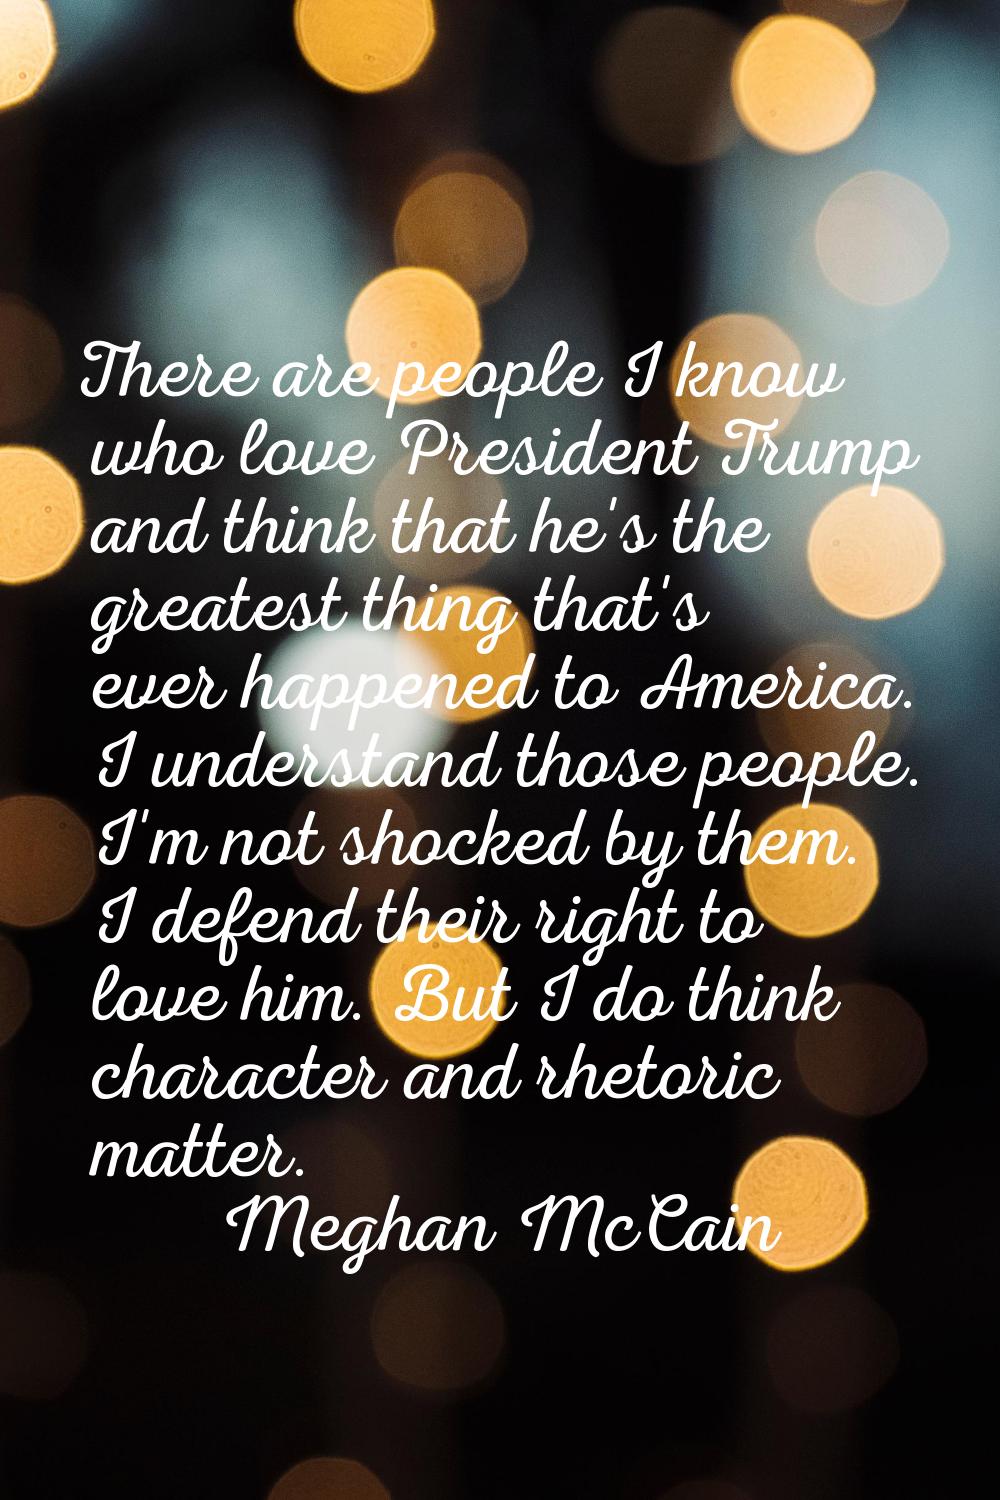 There are people I know who love President Trump and think that he's the greatest thing that's ever